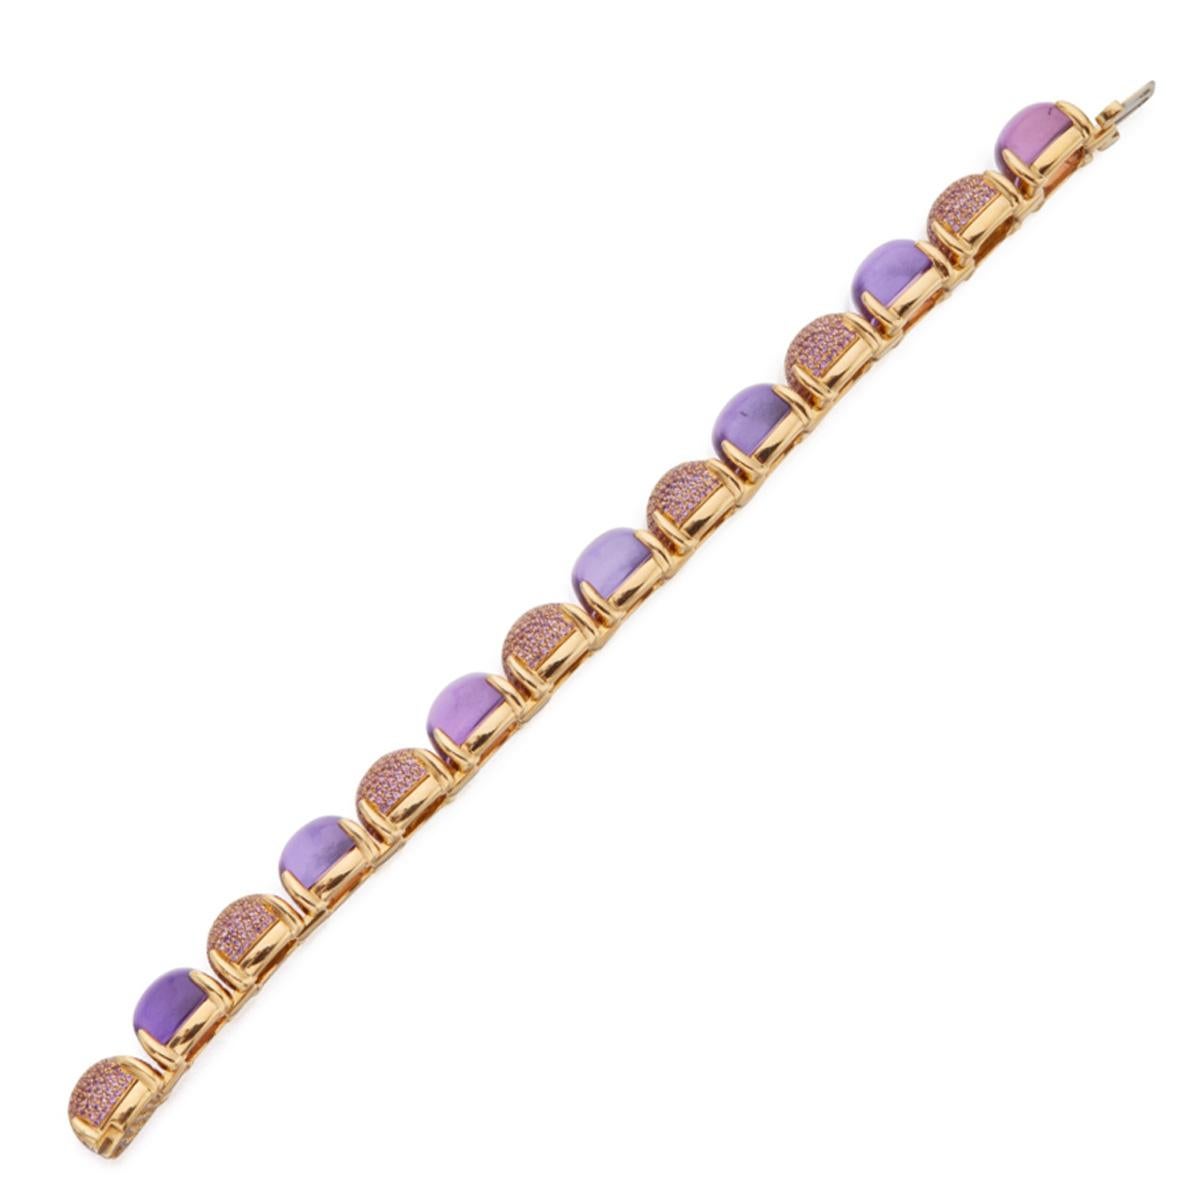 A magnificent authentic Tiffany & Co bracelet by Paloma Picasso composing of 7 amethyst cabochones and alternating pave amethyst sections set in 18k gold.

